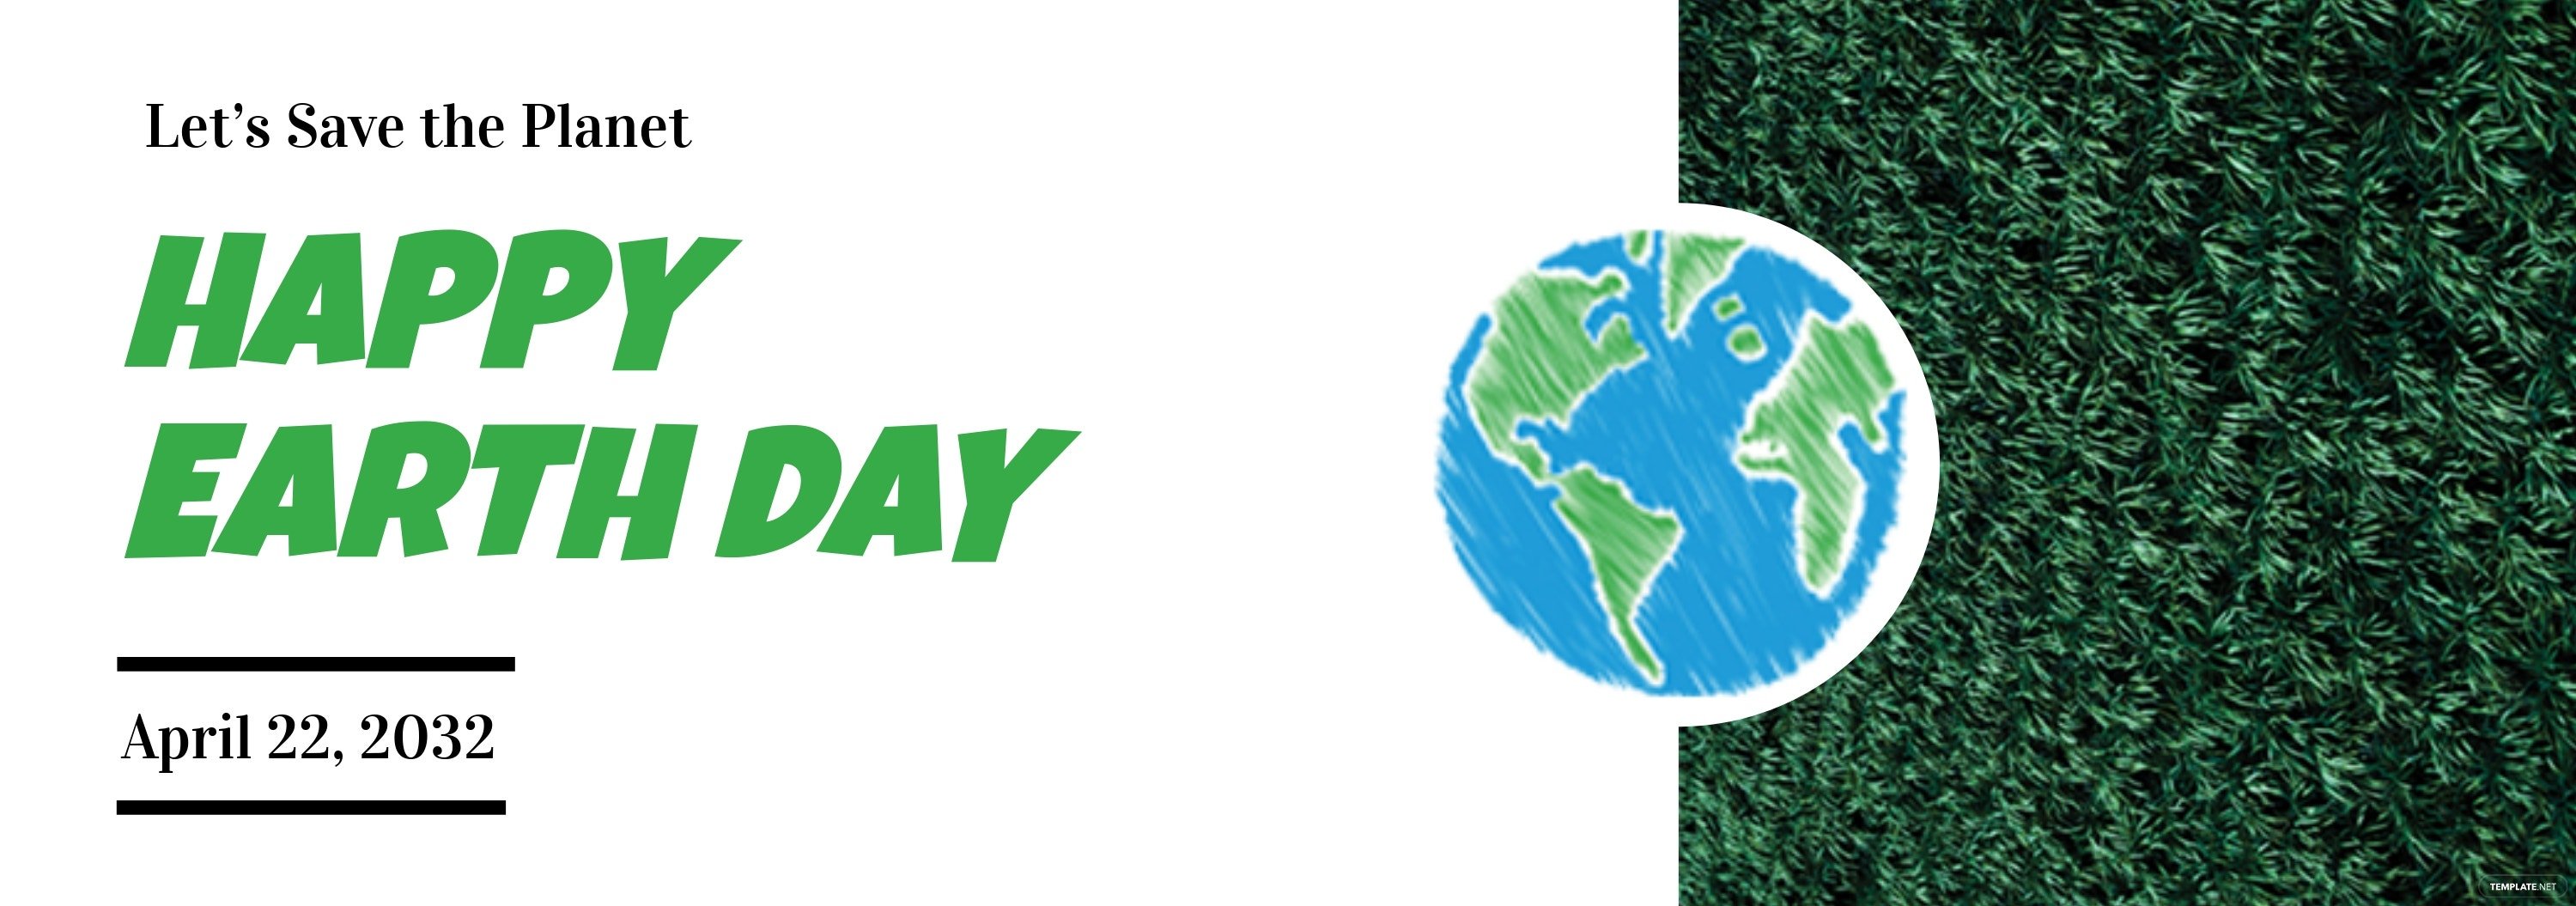 earth-day-tumblr-banner-template